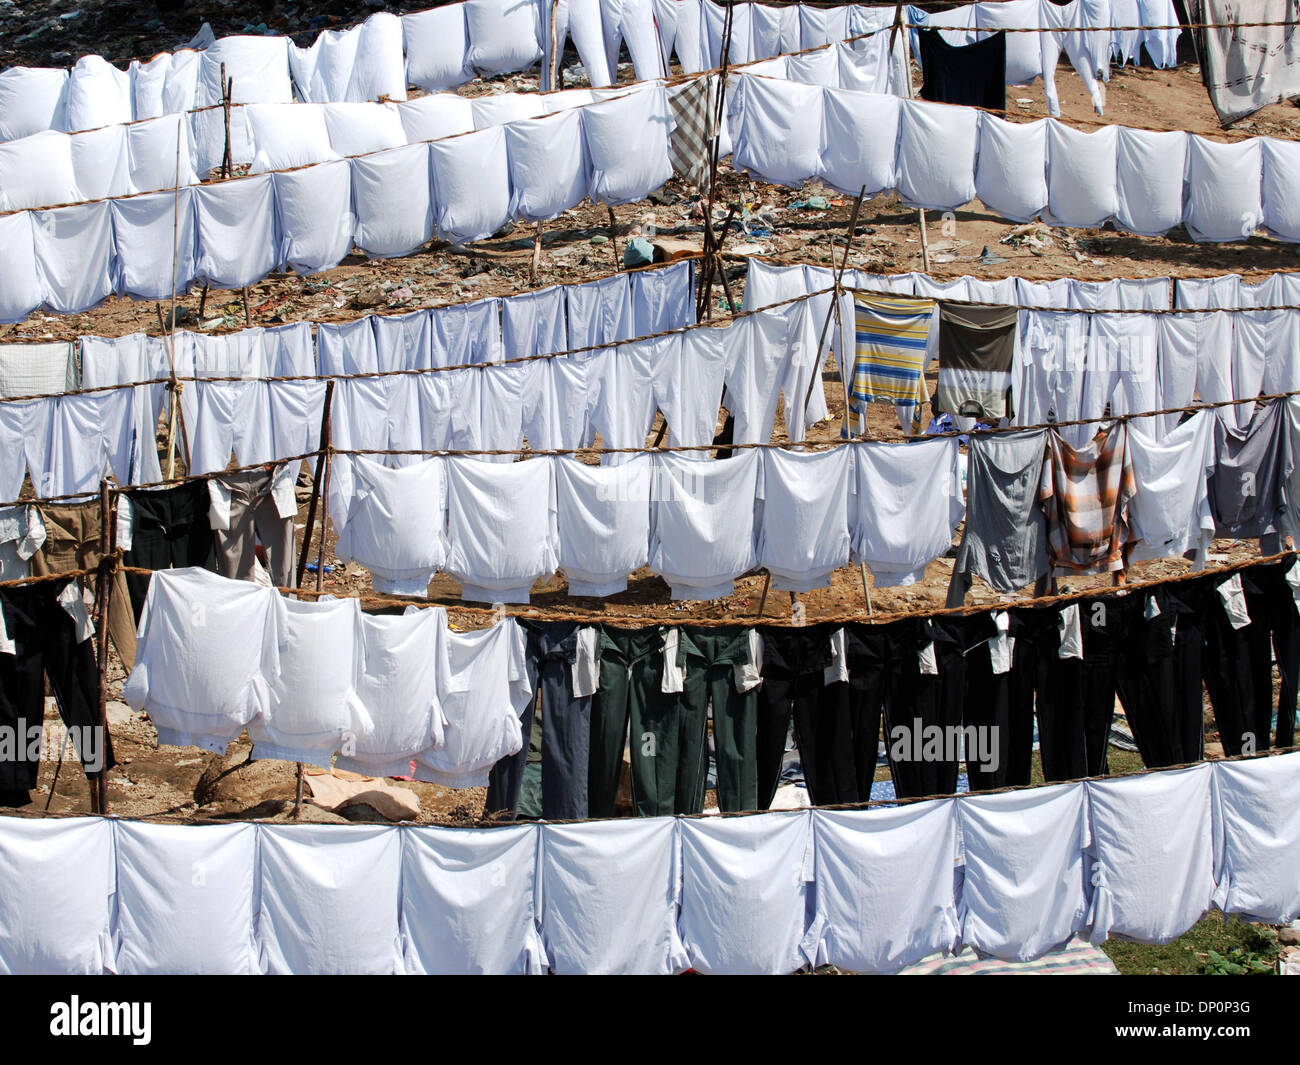 Mar 31, 2006; Chennai, Tamil Nadu, INDIA; Clothes washed in the Adyar (which is the local sewage river) are hung out to dry. For some reason they are the whites shirts in town. Mandatory Credit: Photo by Daniel Wilkinson/Daniel Wilkinson. (©) Copyright 2006 by Daniel Wilkinson Stock Photo